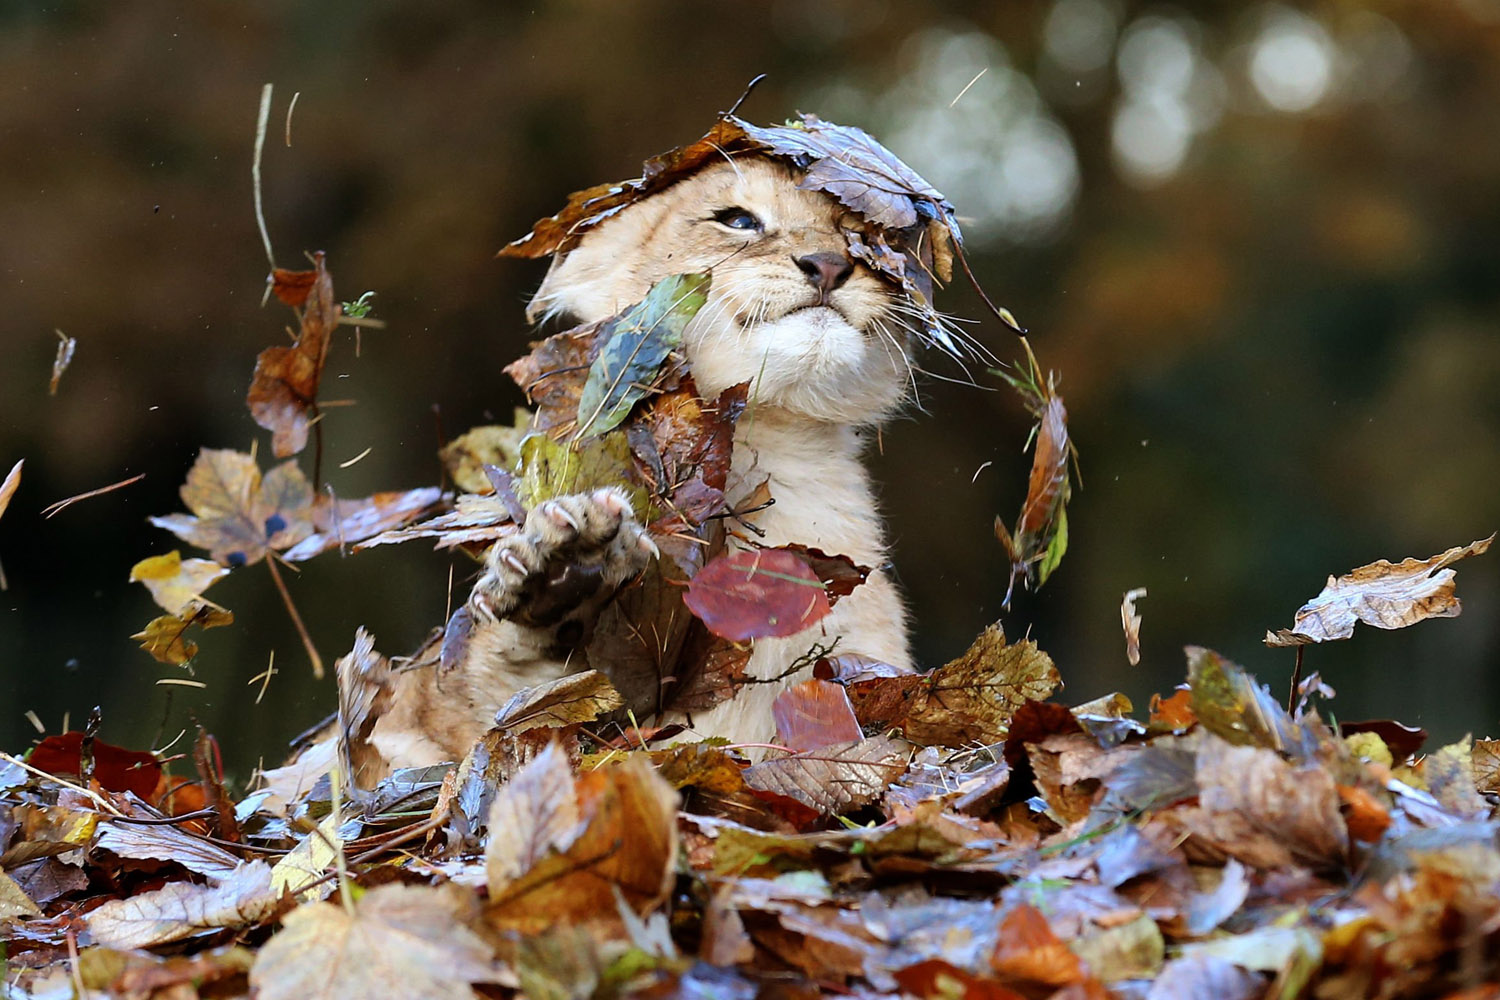 LION CUB PLAYS IN AUTUMN LEAVES